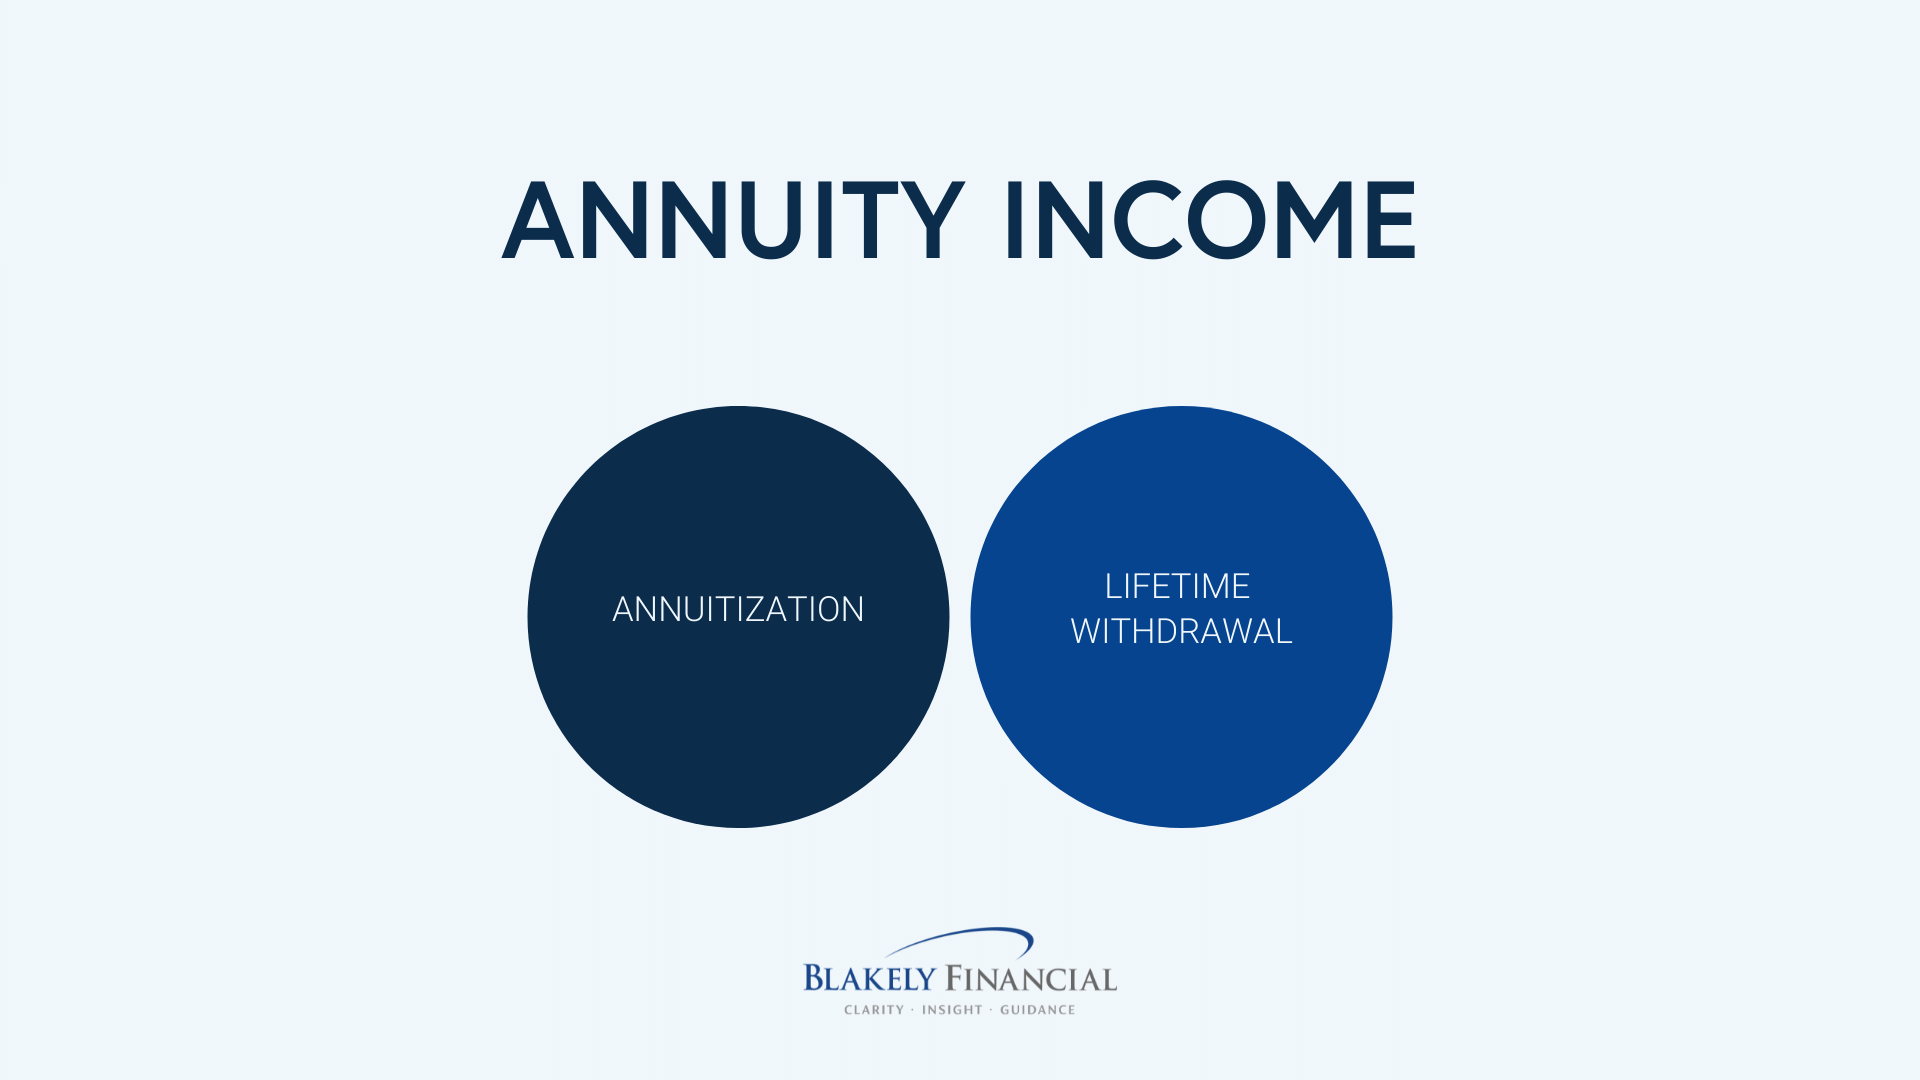 Annuity Income Annuitization vs. Lifetime Withdrawal